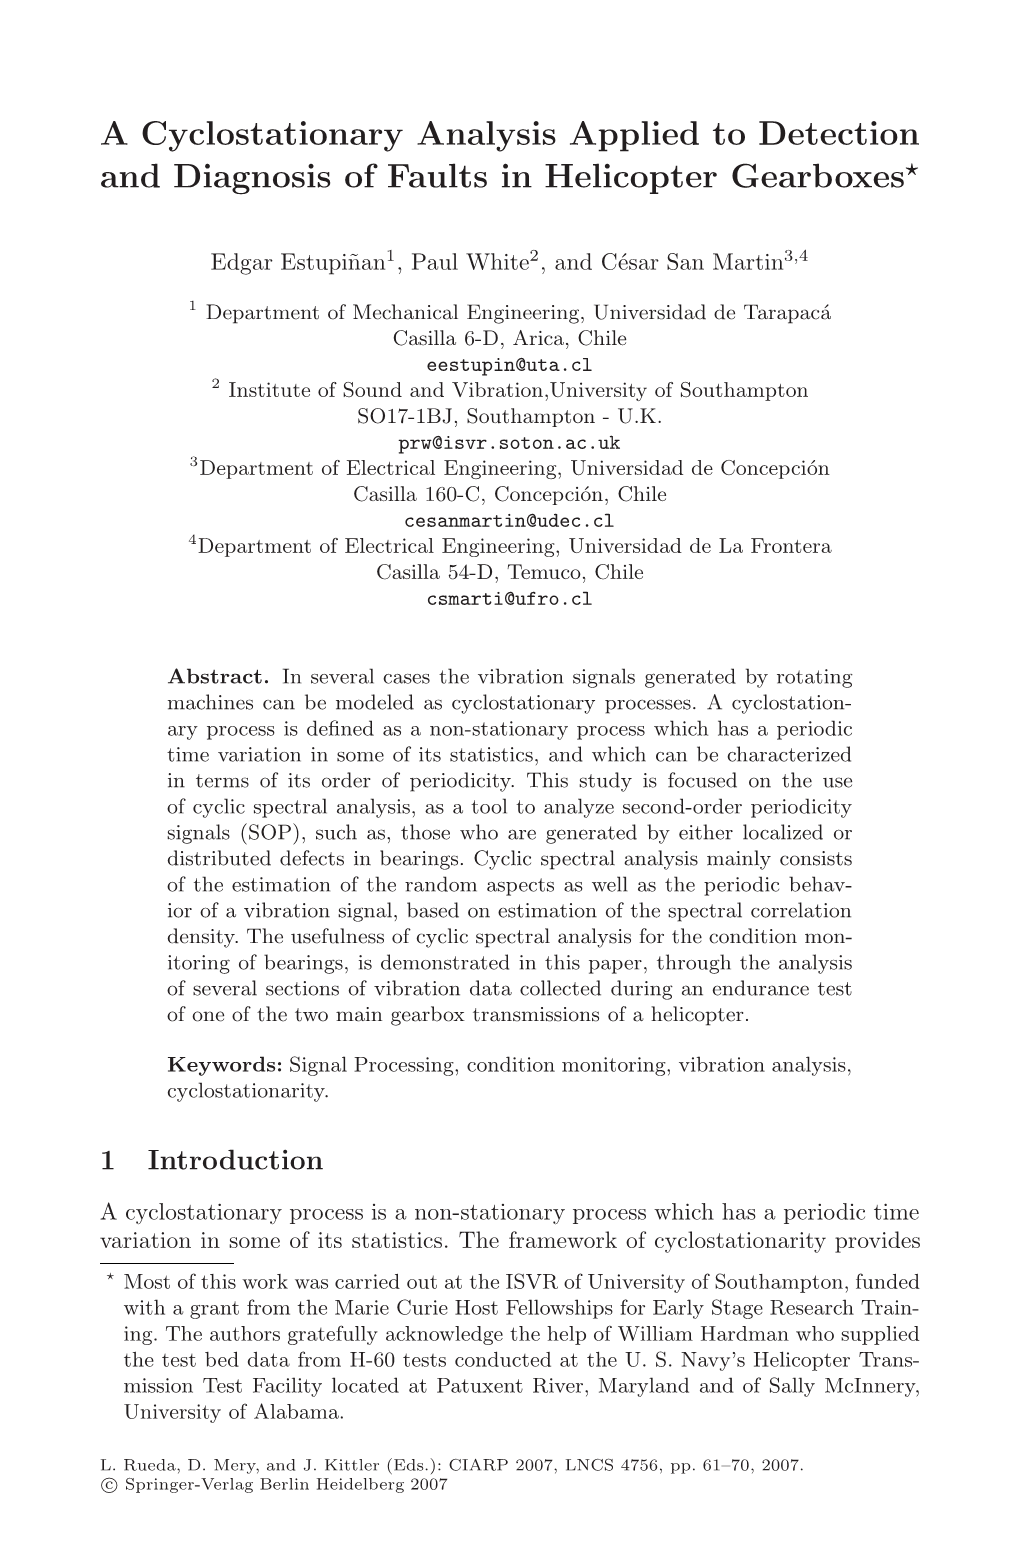 A Cyclostationary Analysis Applied to Detection and Diagnosis of Faults in Helicopter Gearboxes